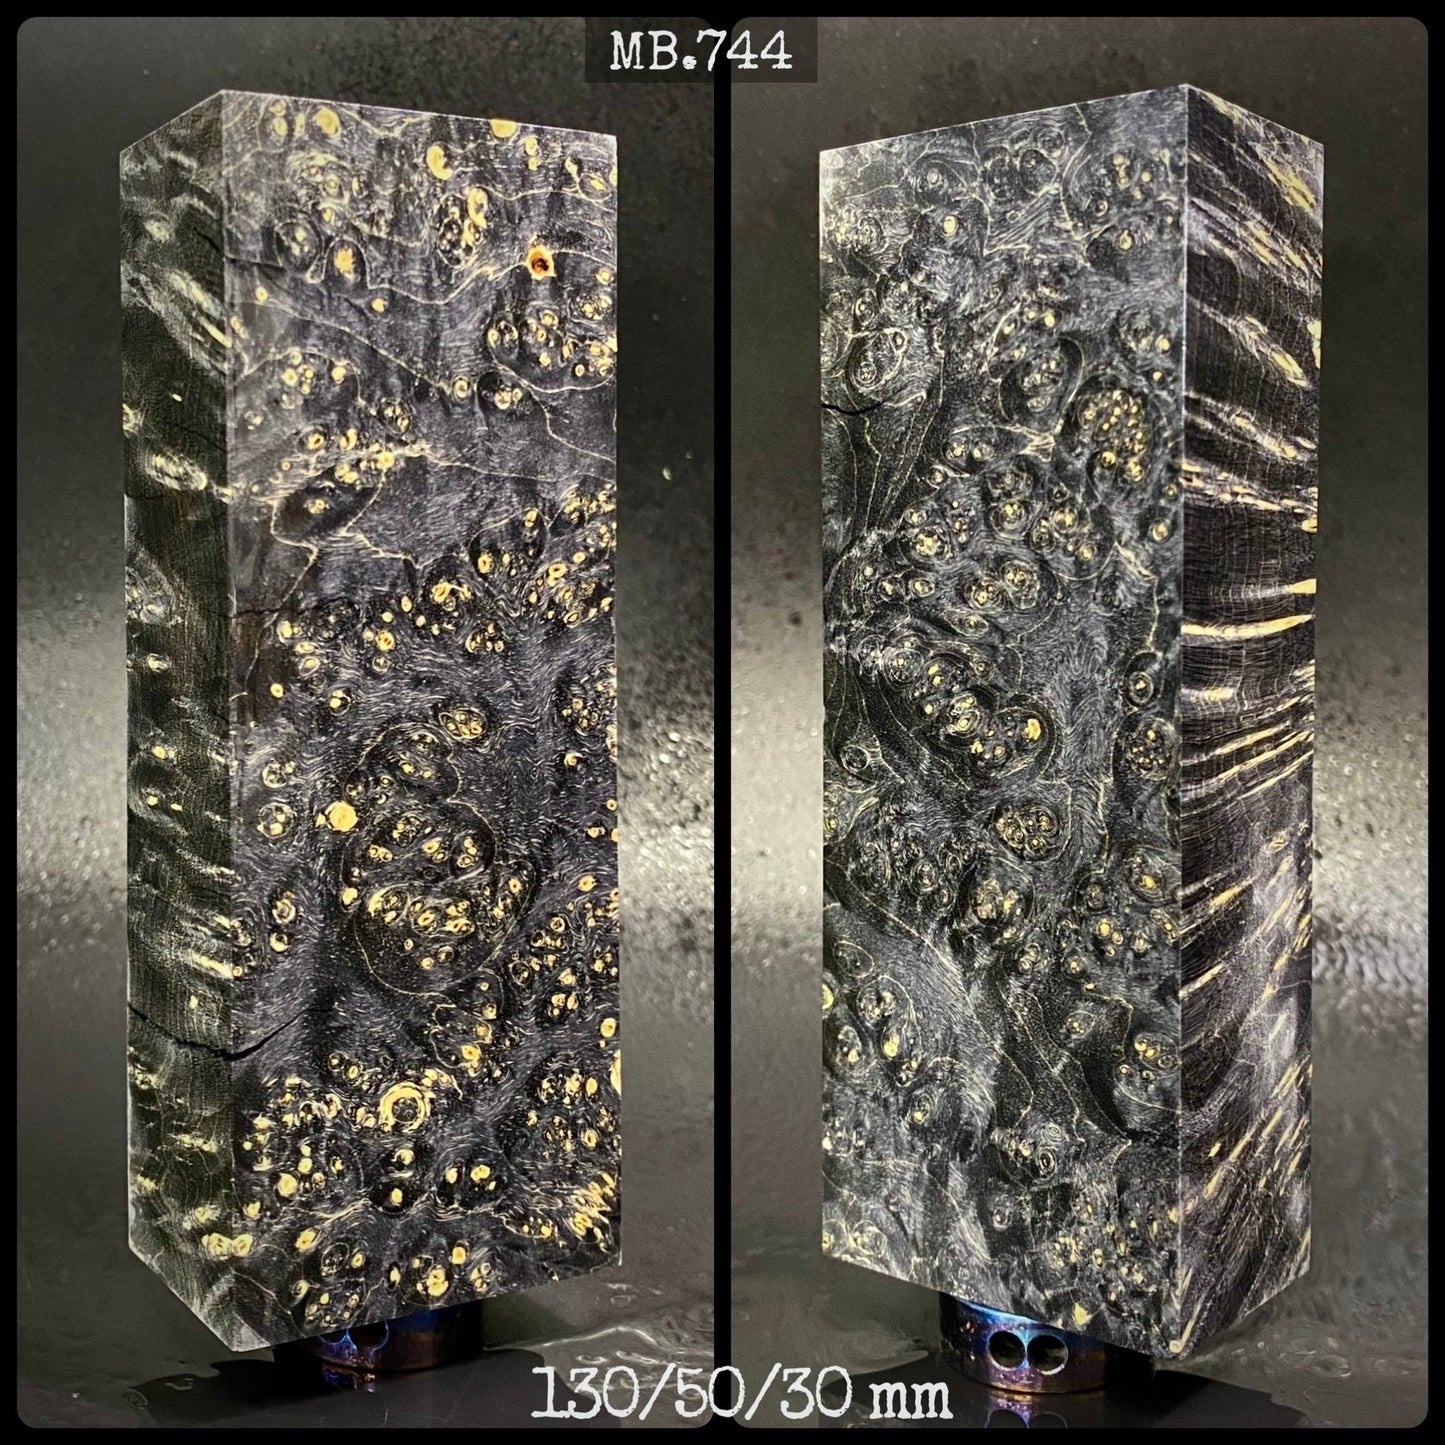 MAPLE BURL Stabilized Wood, BLACK Blanks for Woodworking. France Stock.